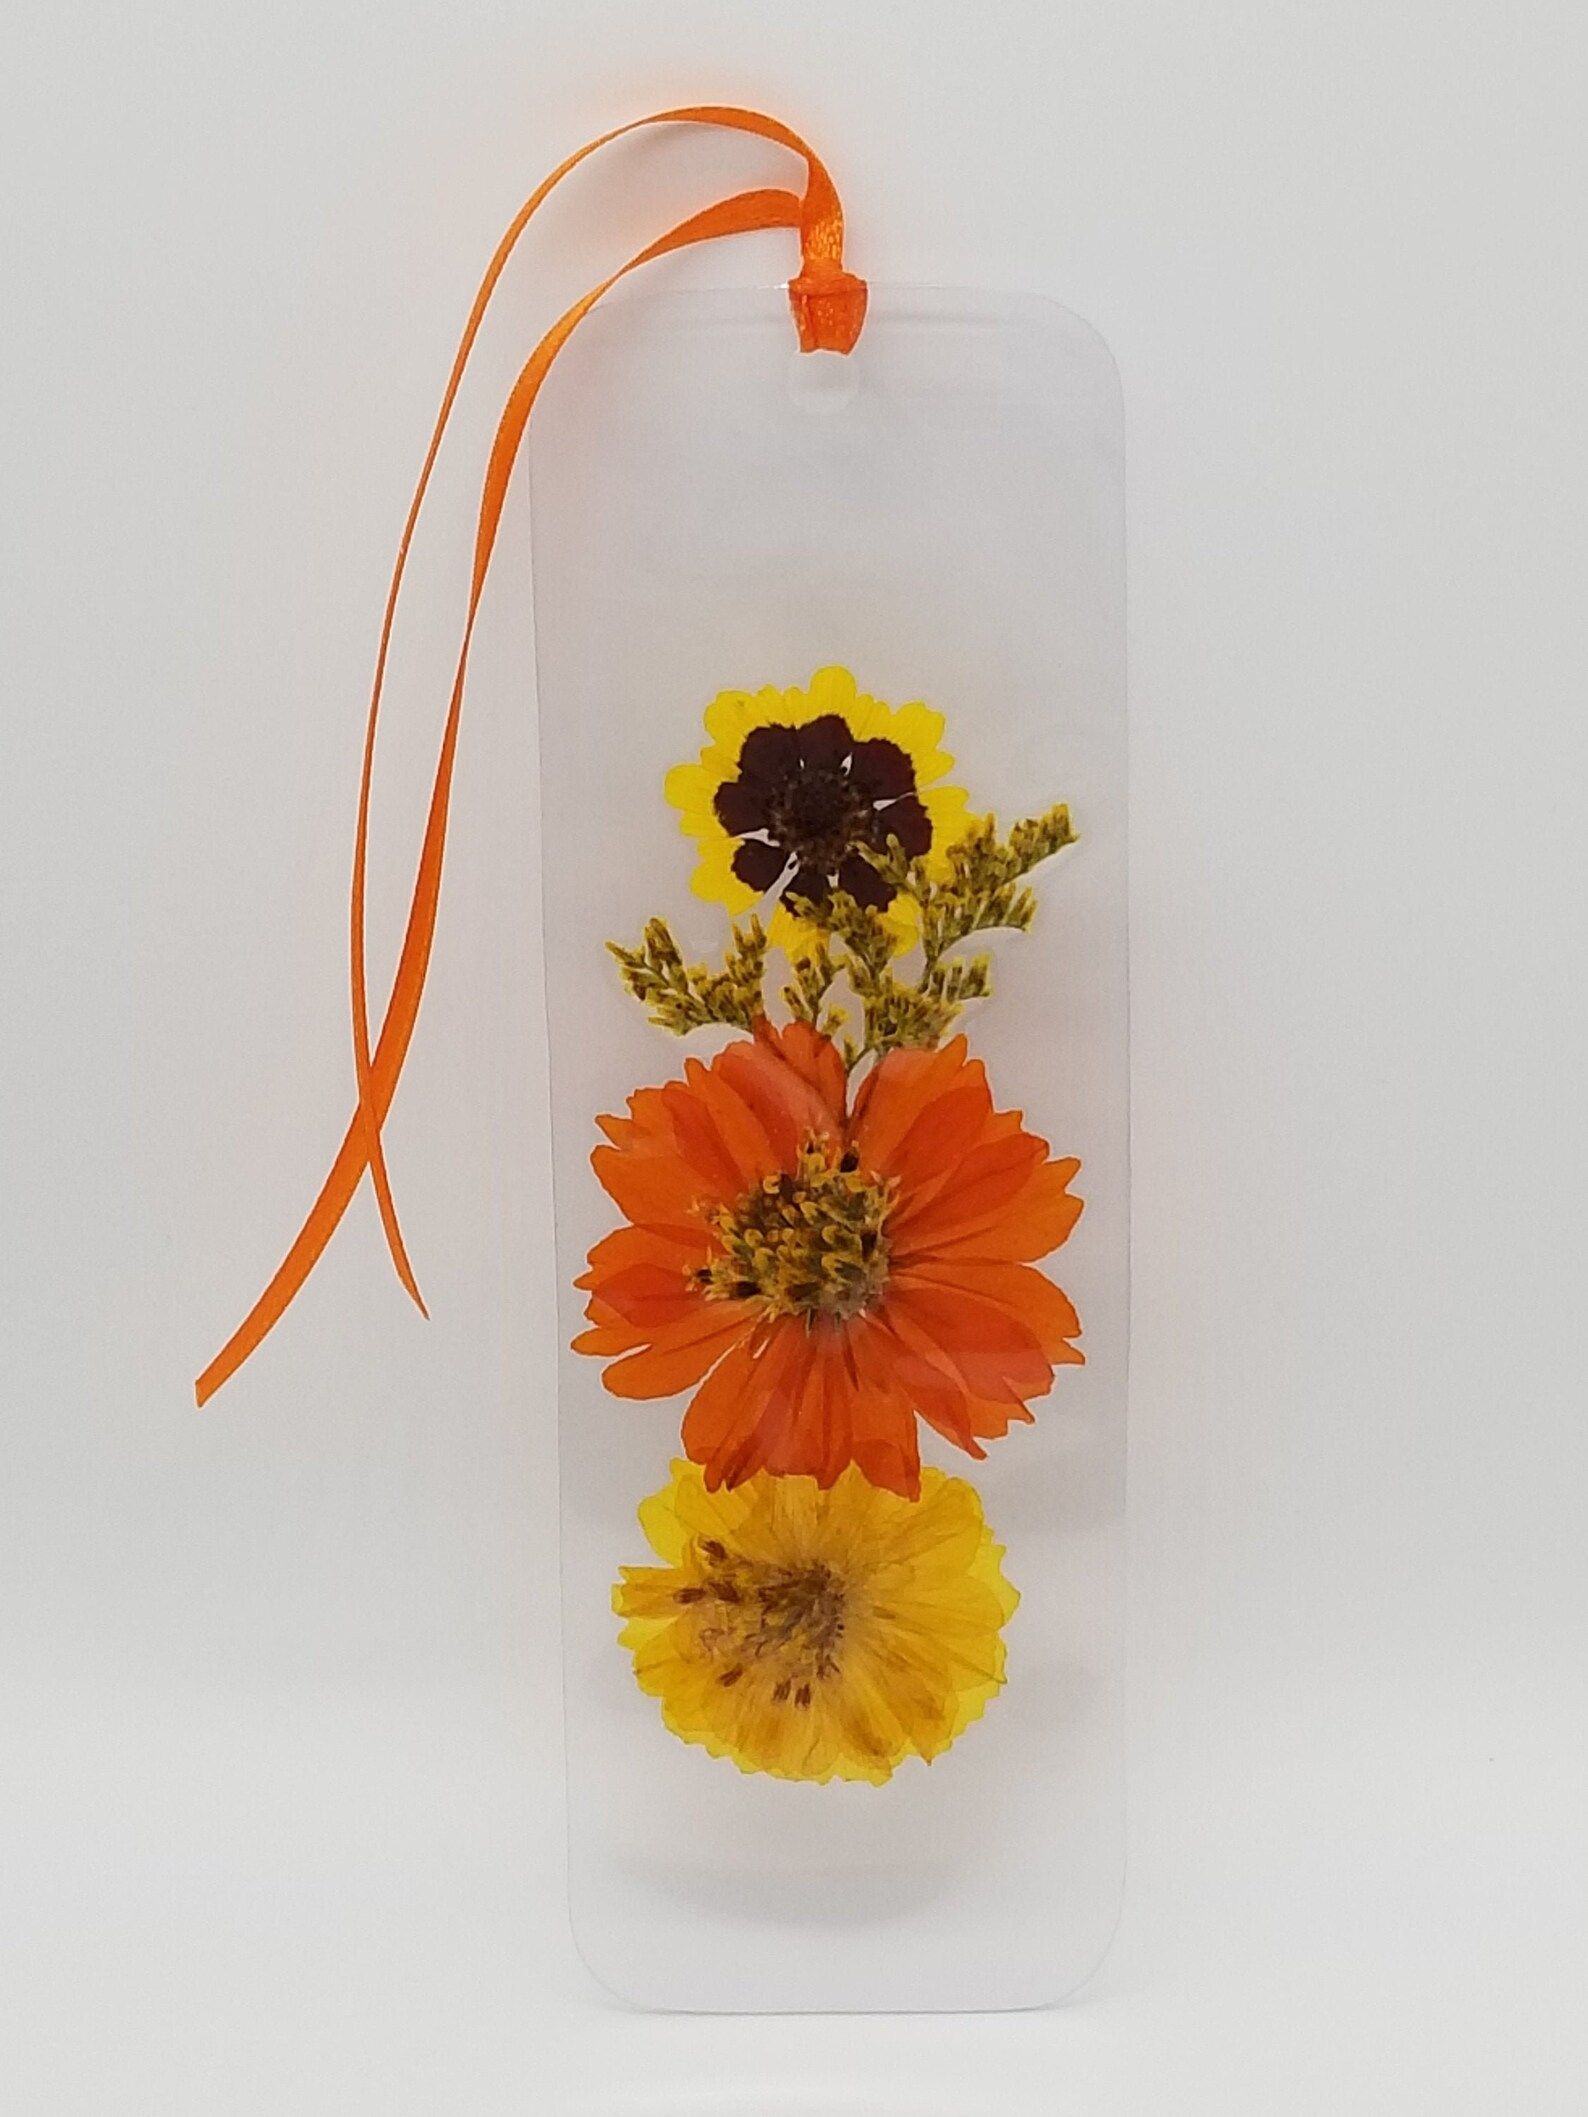 Image of pressed flower bookmark. Inside the bookmark are two yellow flowers and one orange flower. It has an orange tassel.